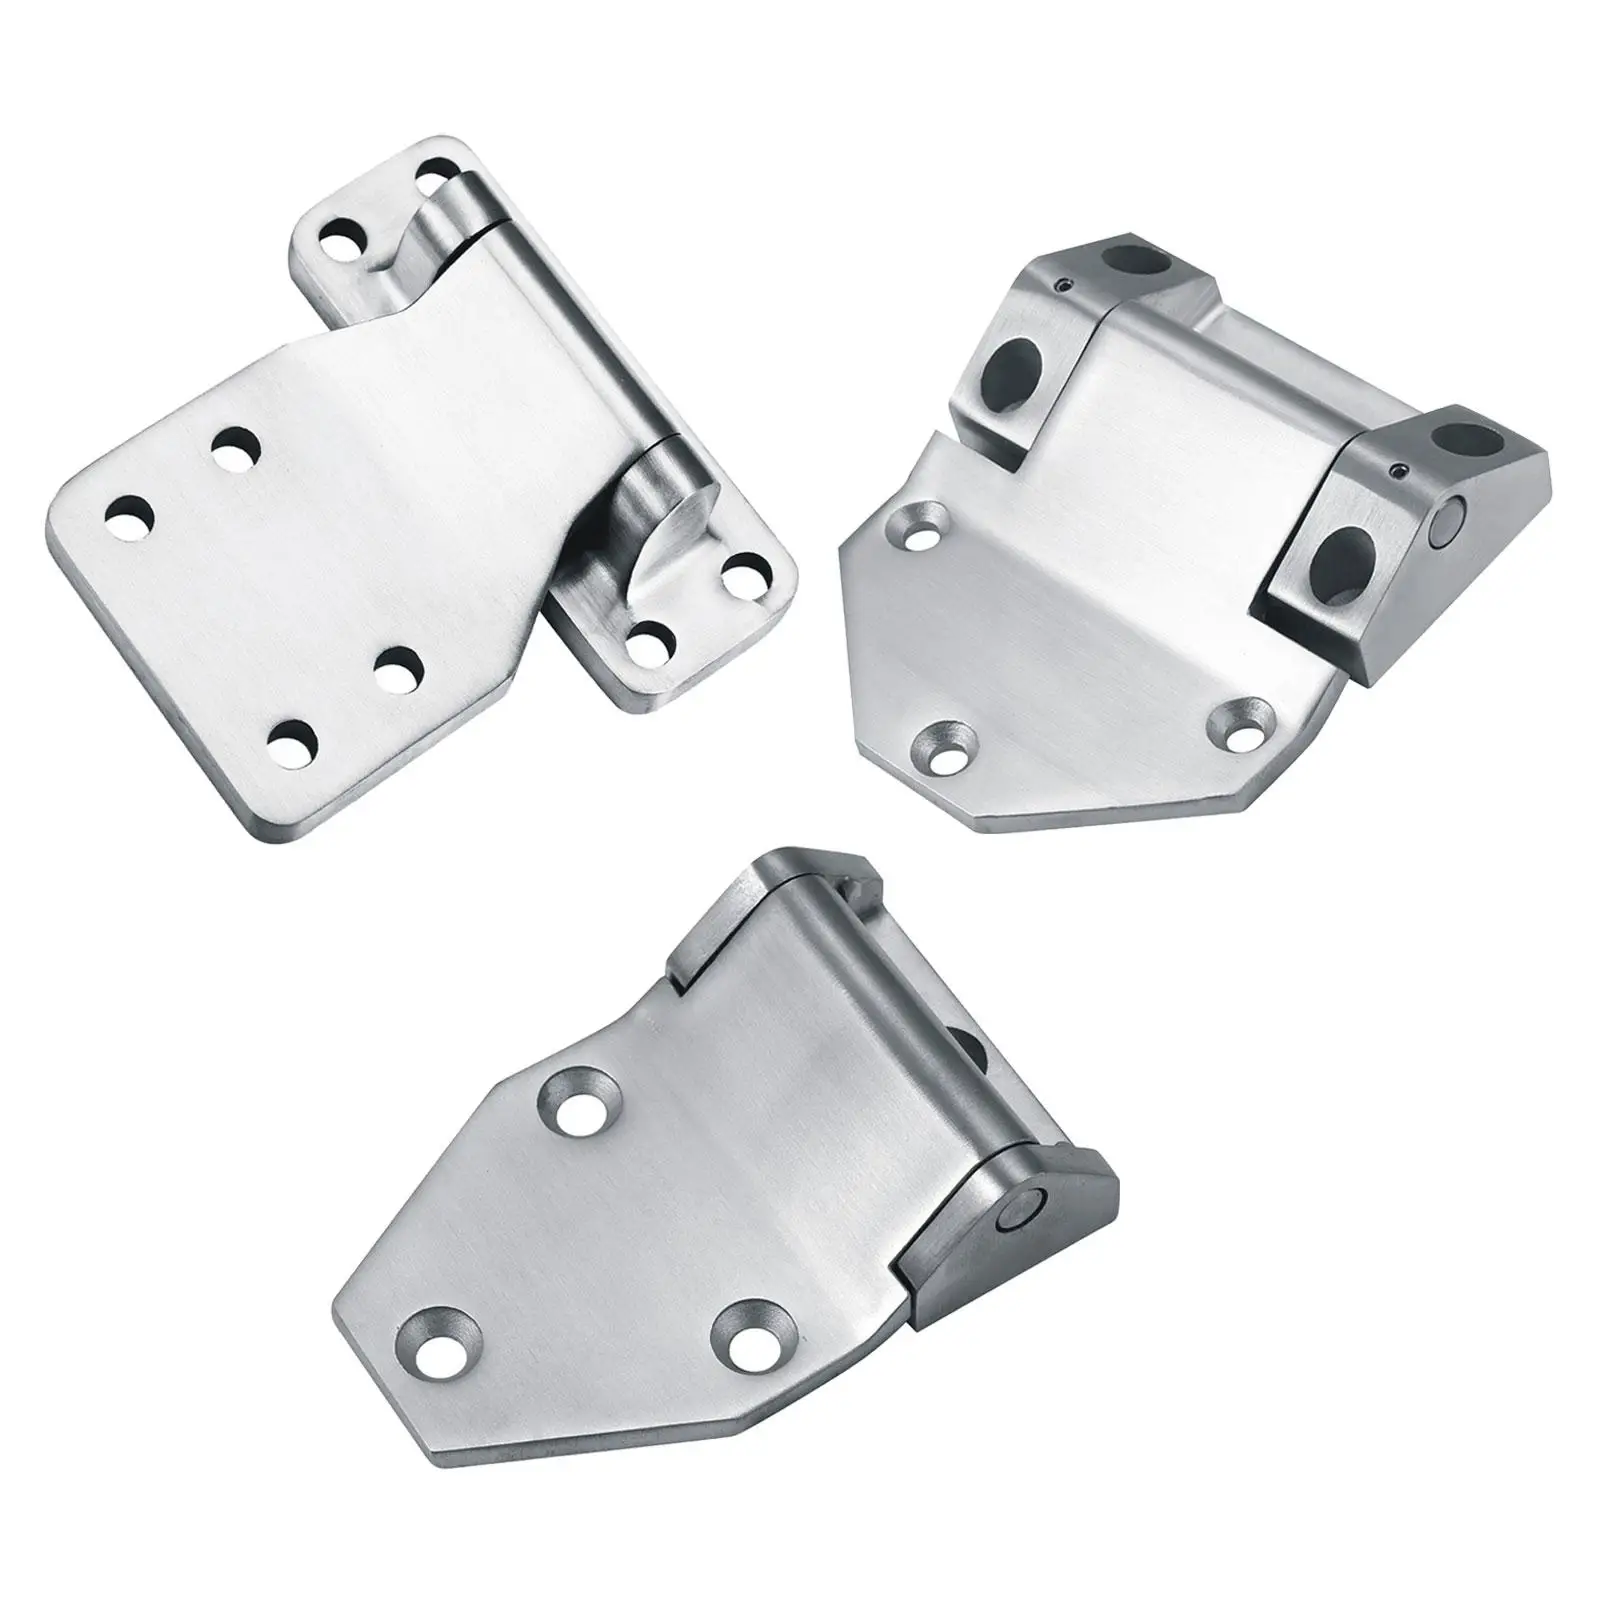 Steel Door Hinges Multi Function Replaces Shed Hinges for RV Window Barn